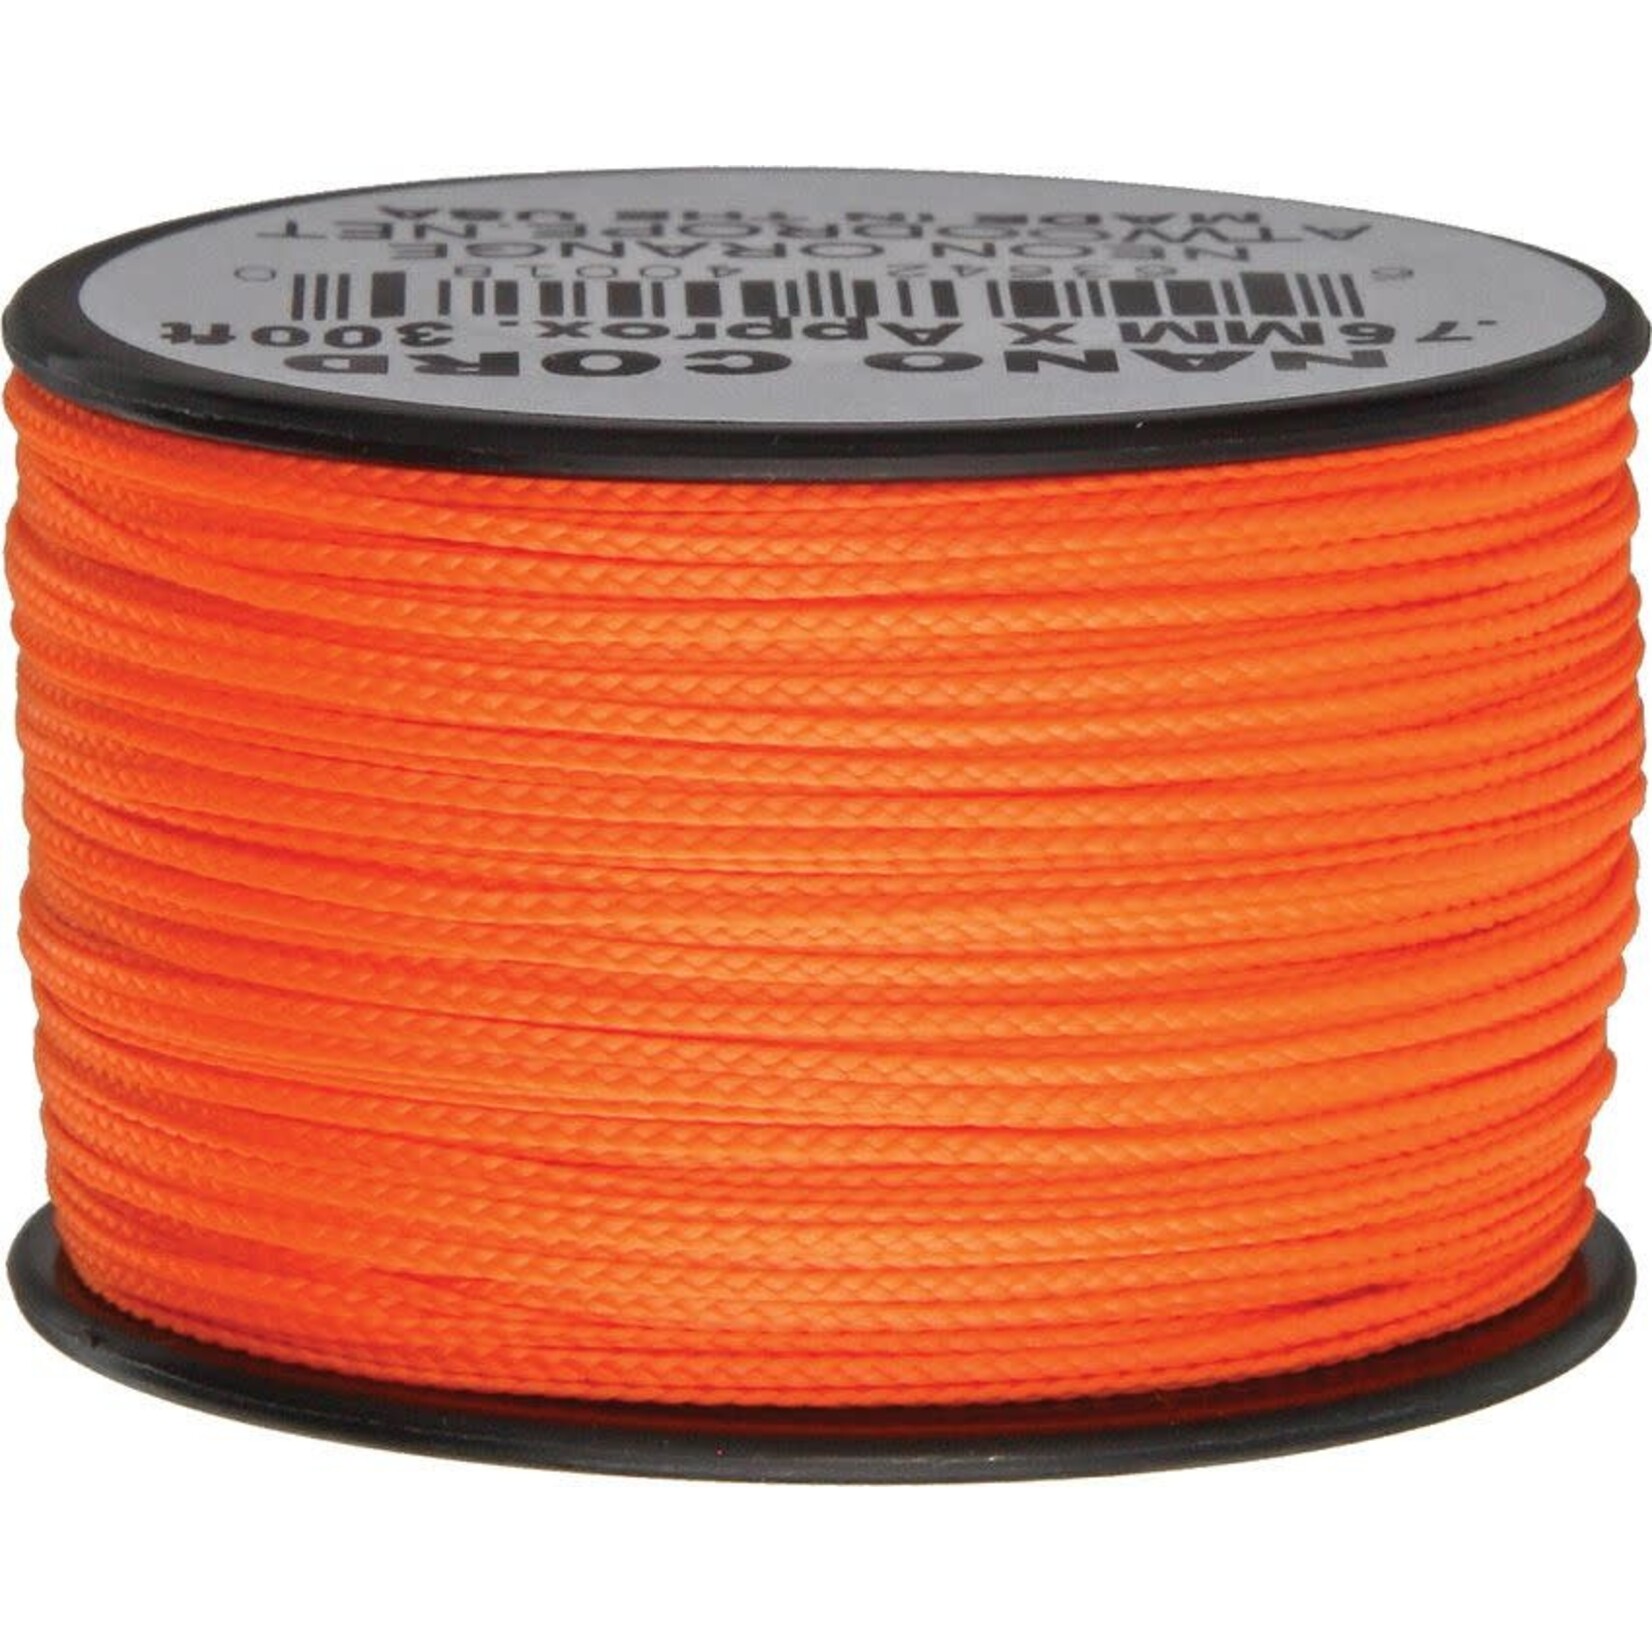 Atwood Rope Atwood Nano Cord 0.75mm 300ft Spool